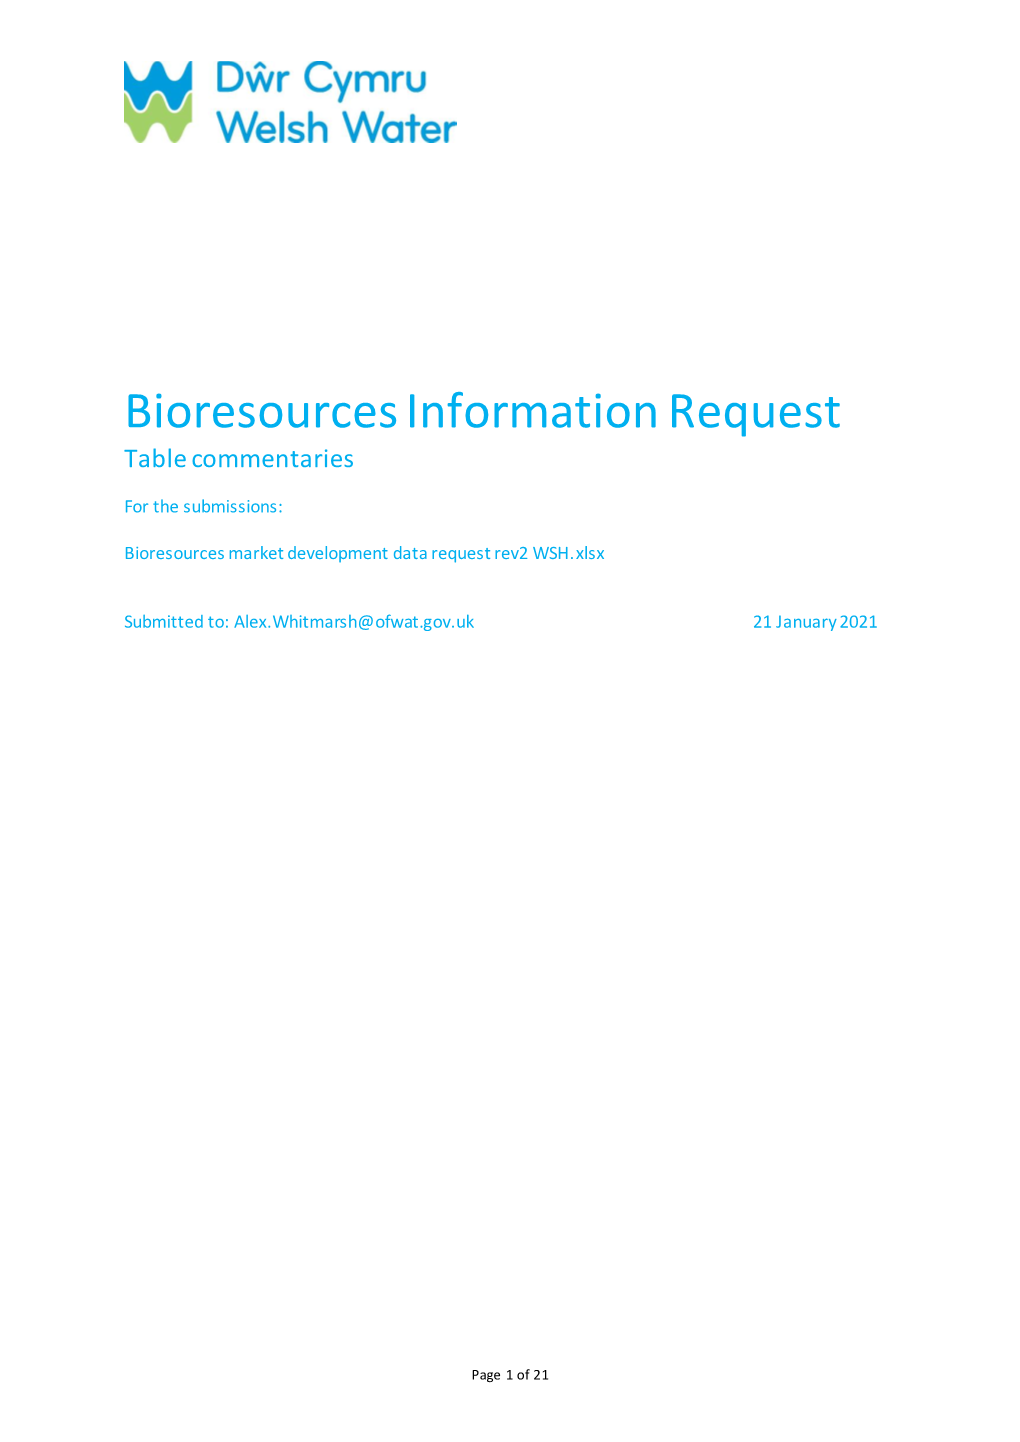 Bioresources Information Request Table Commentaries